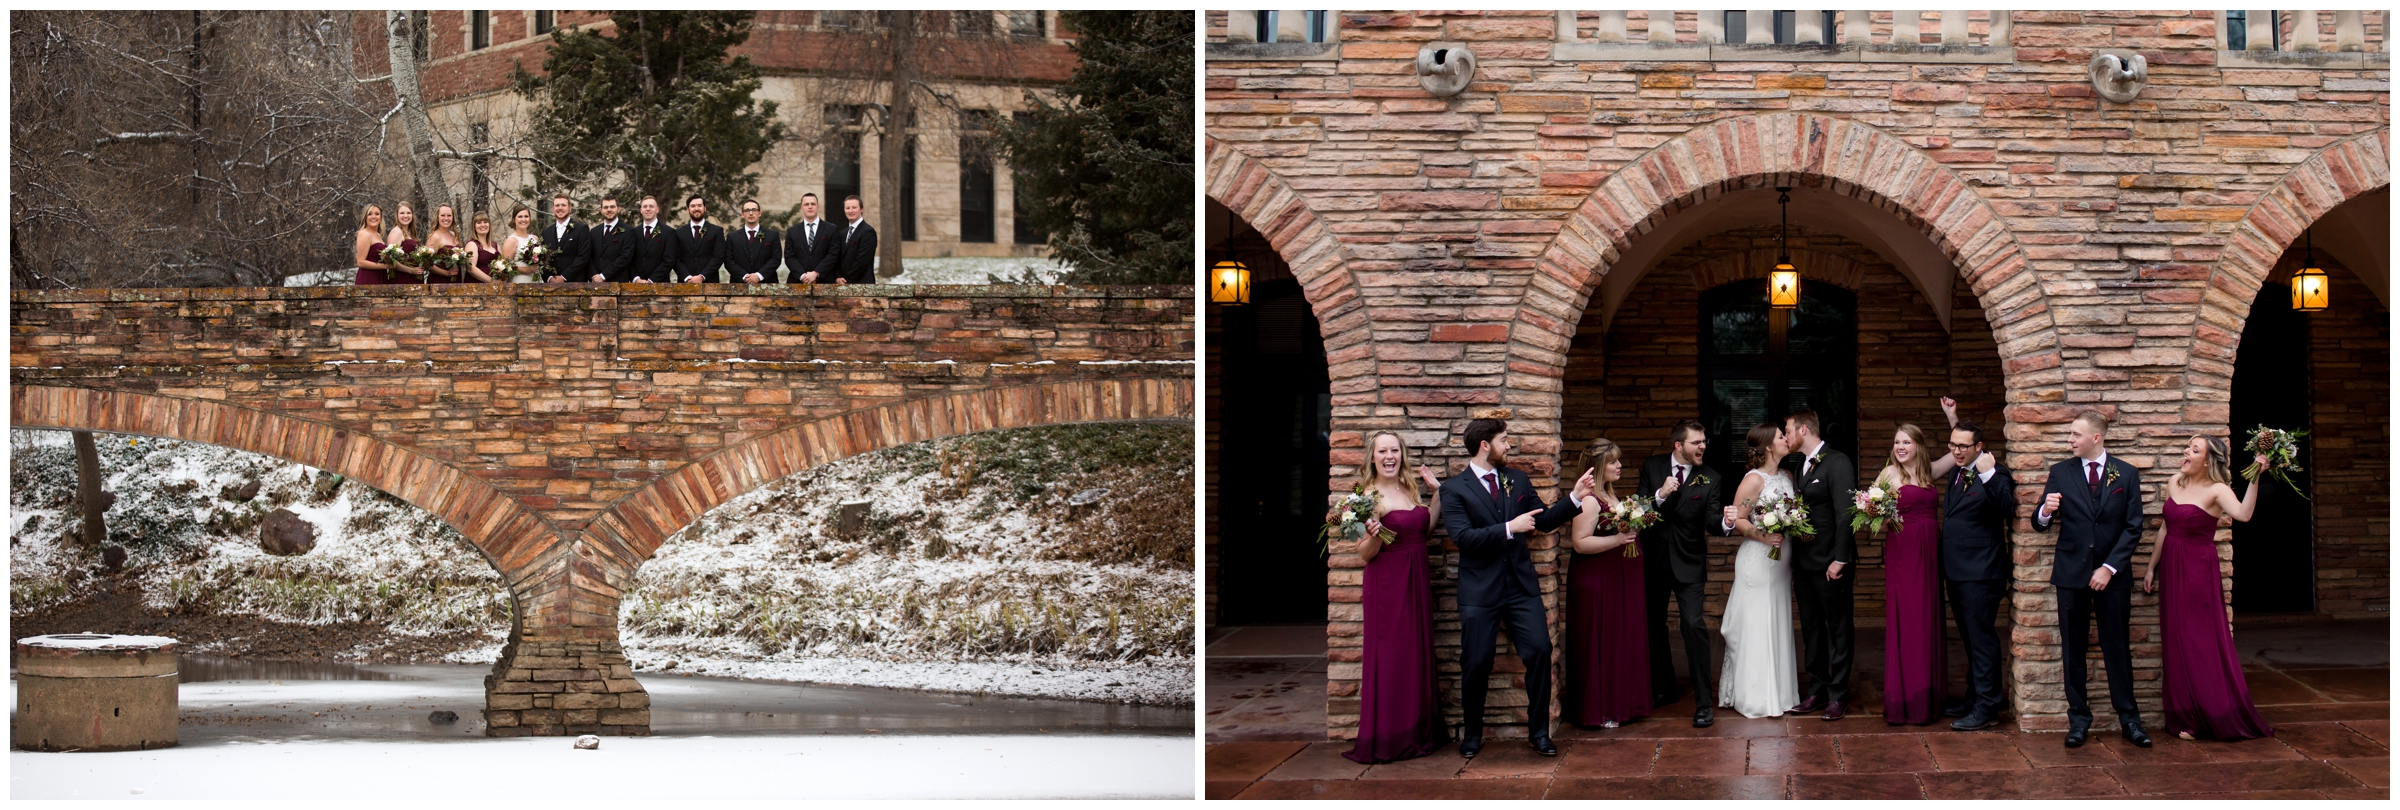 bridal party in burgundy and black during Colorado winter wedding pictures 